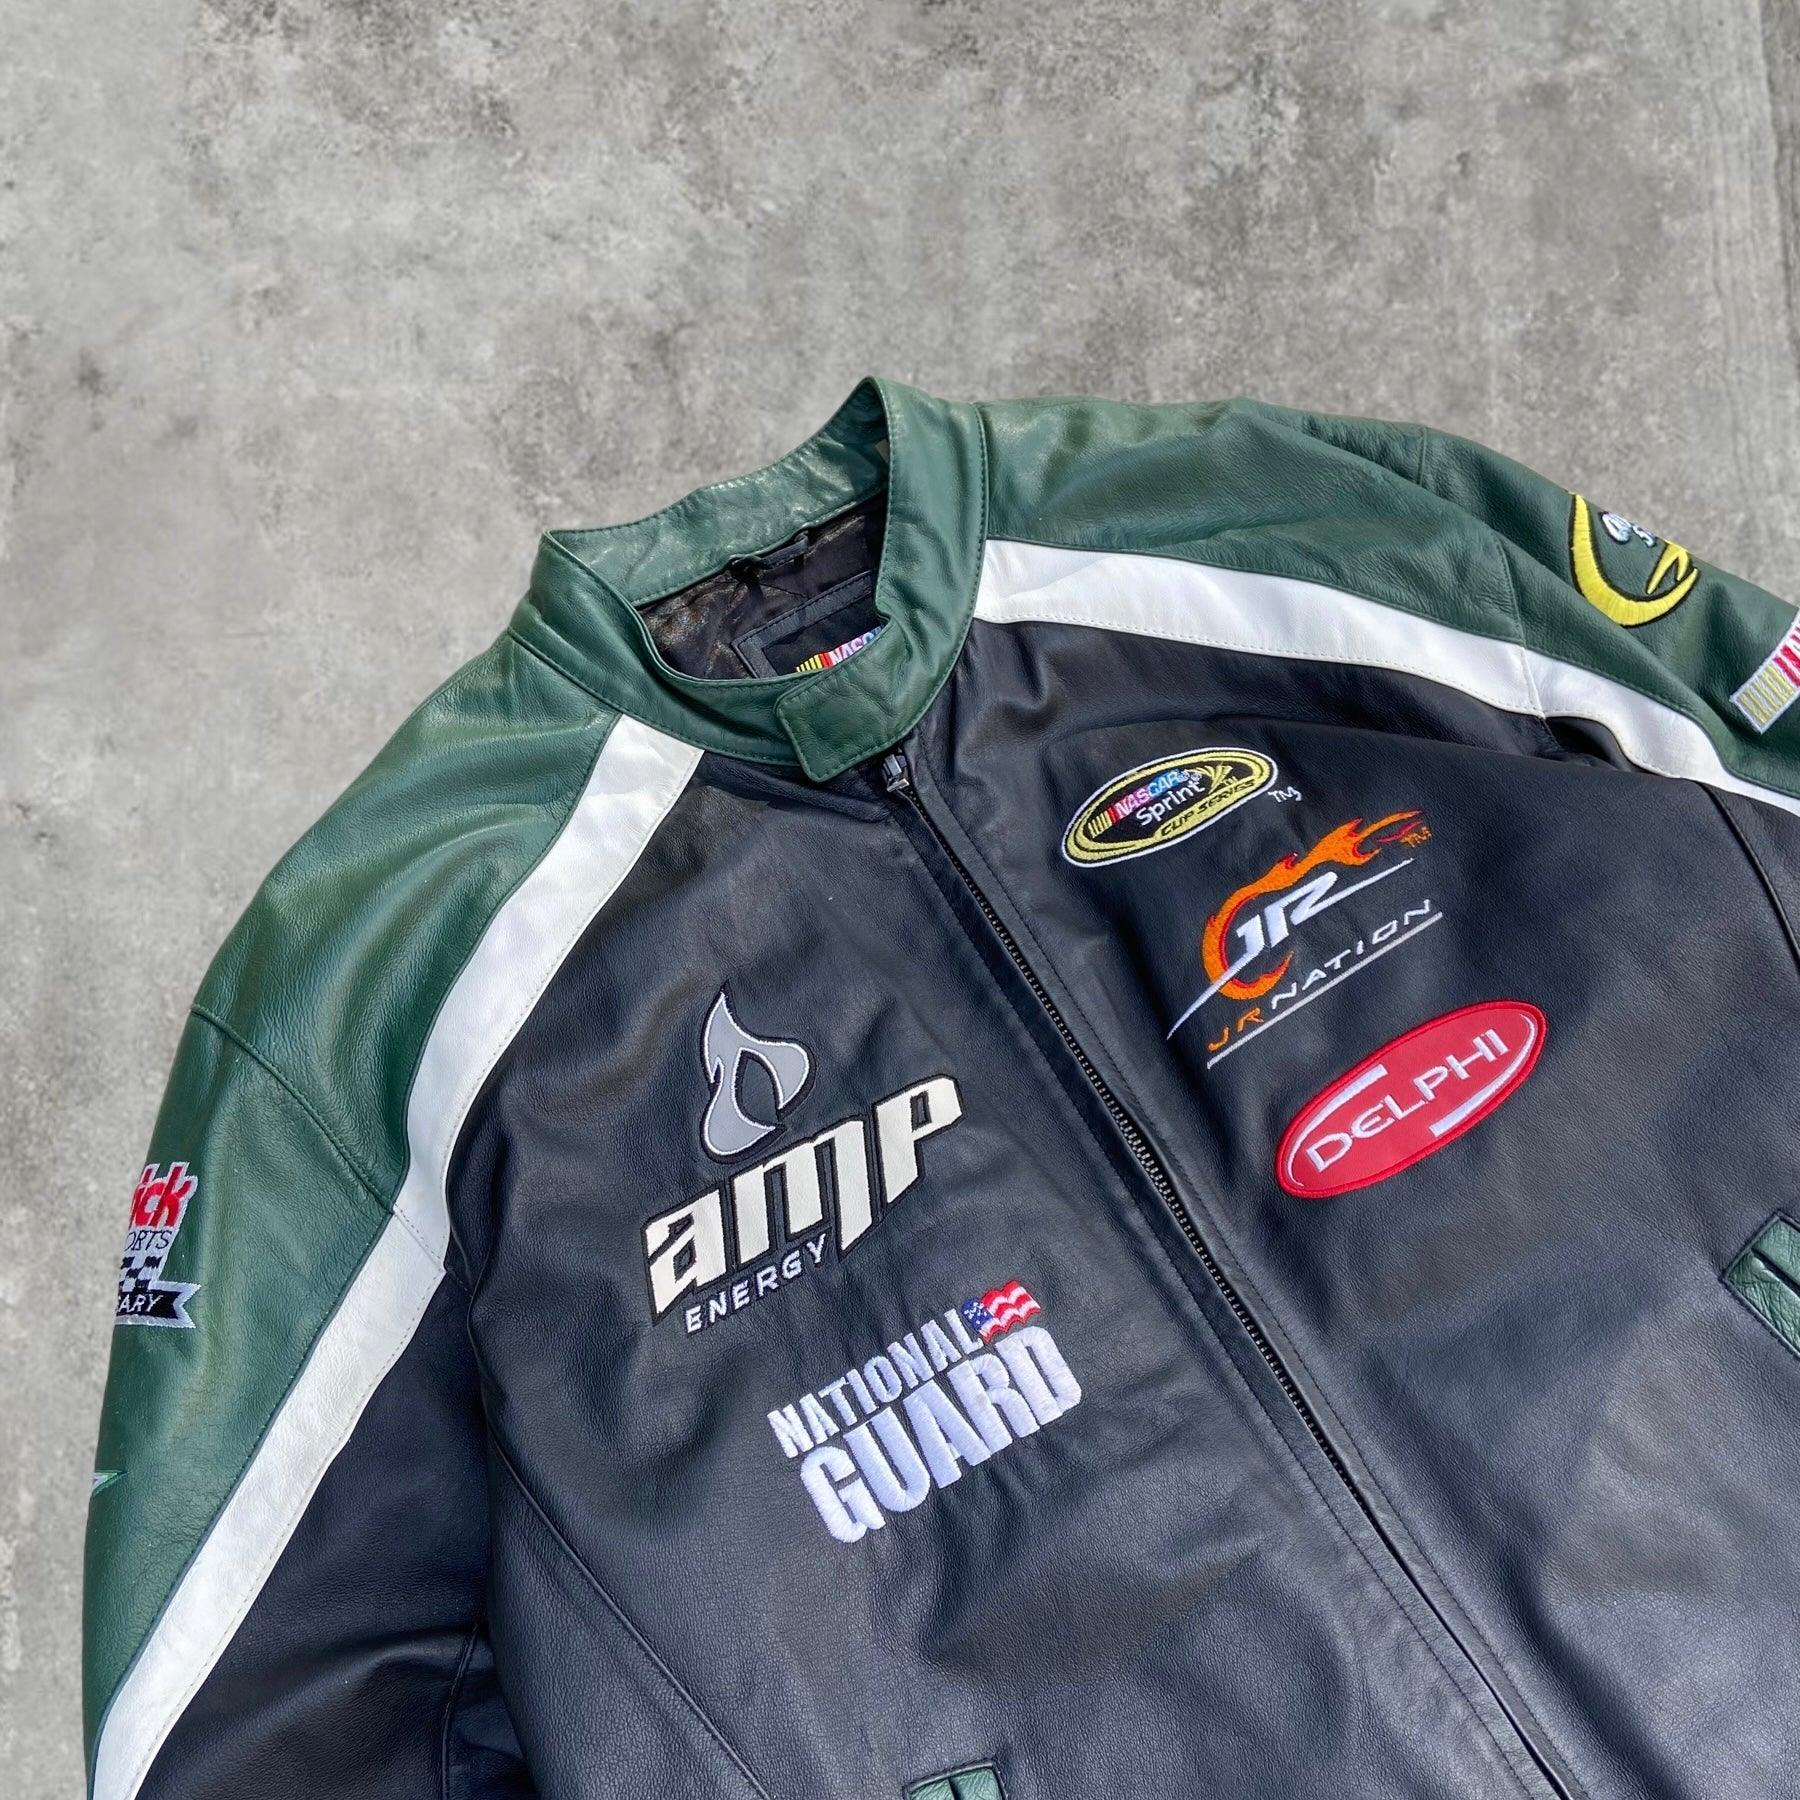 NASCAR RACER LEATHER JACKET - XL - Known Source